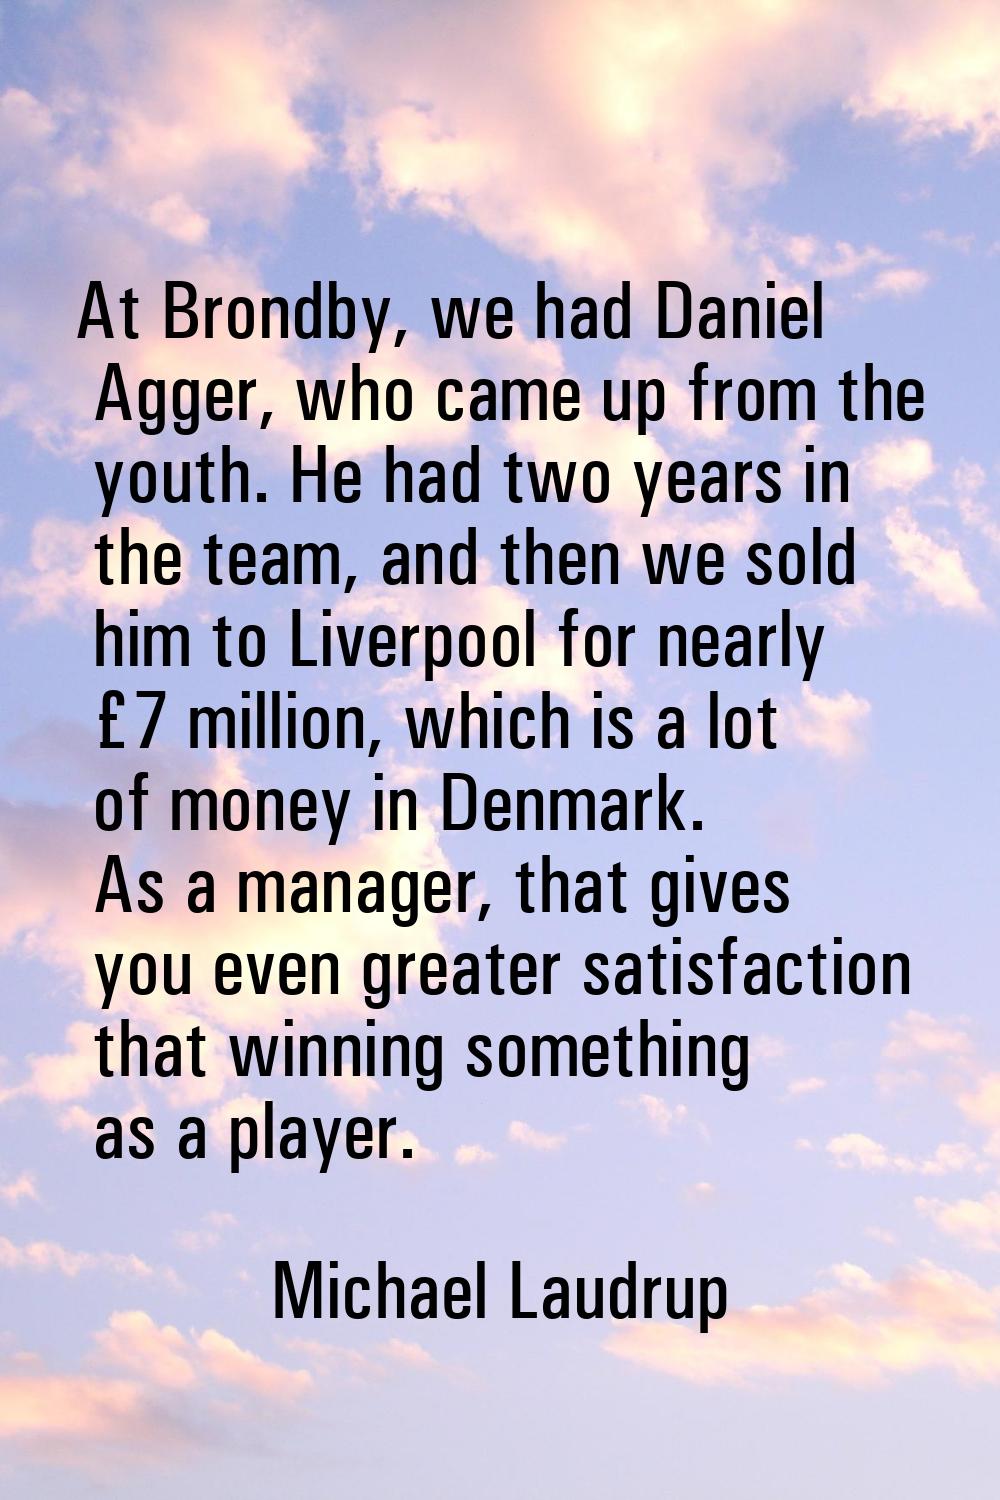 At Brondby, we had Daniel Agger, who came up from the youth. He had two years in the team, and then